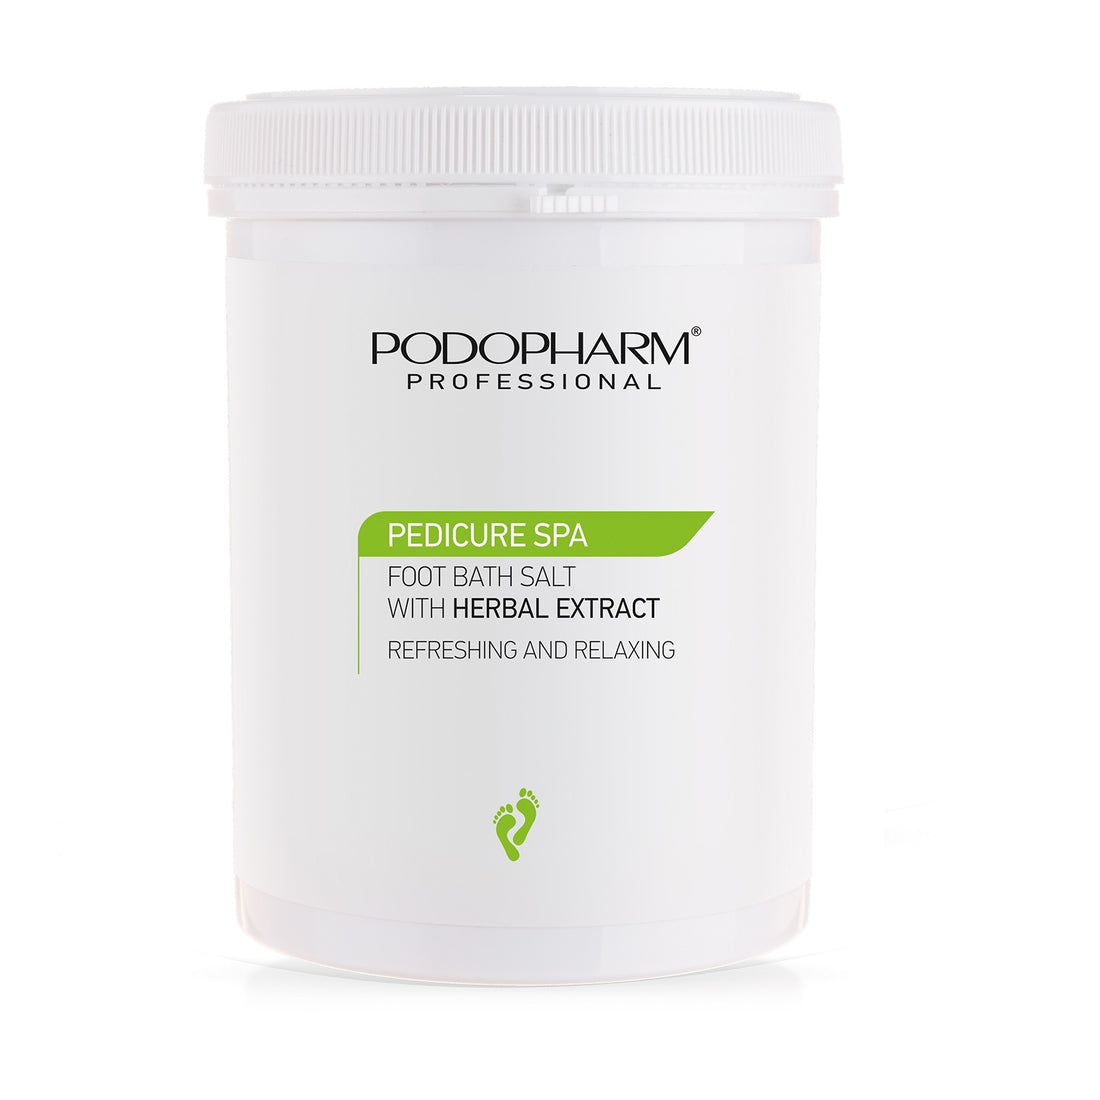 Podopharm Professional Refreshing And Relaxing Foot Bath Salt With Herbal Extract 1400g Podopharm